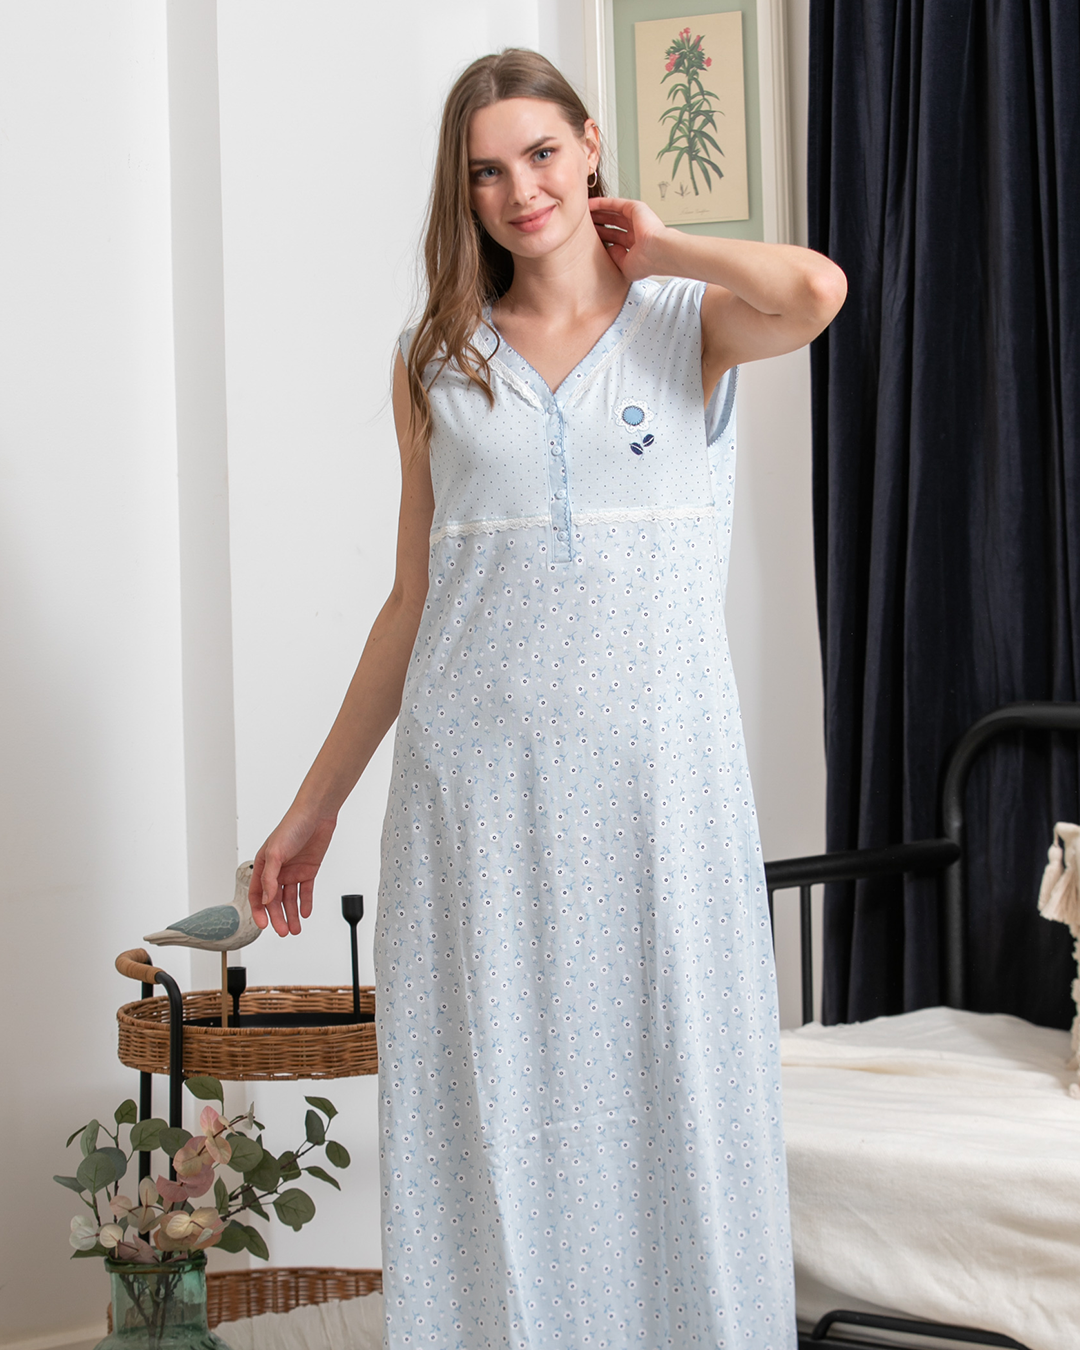 Women's nightgown with floral lace buttons